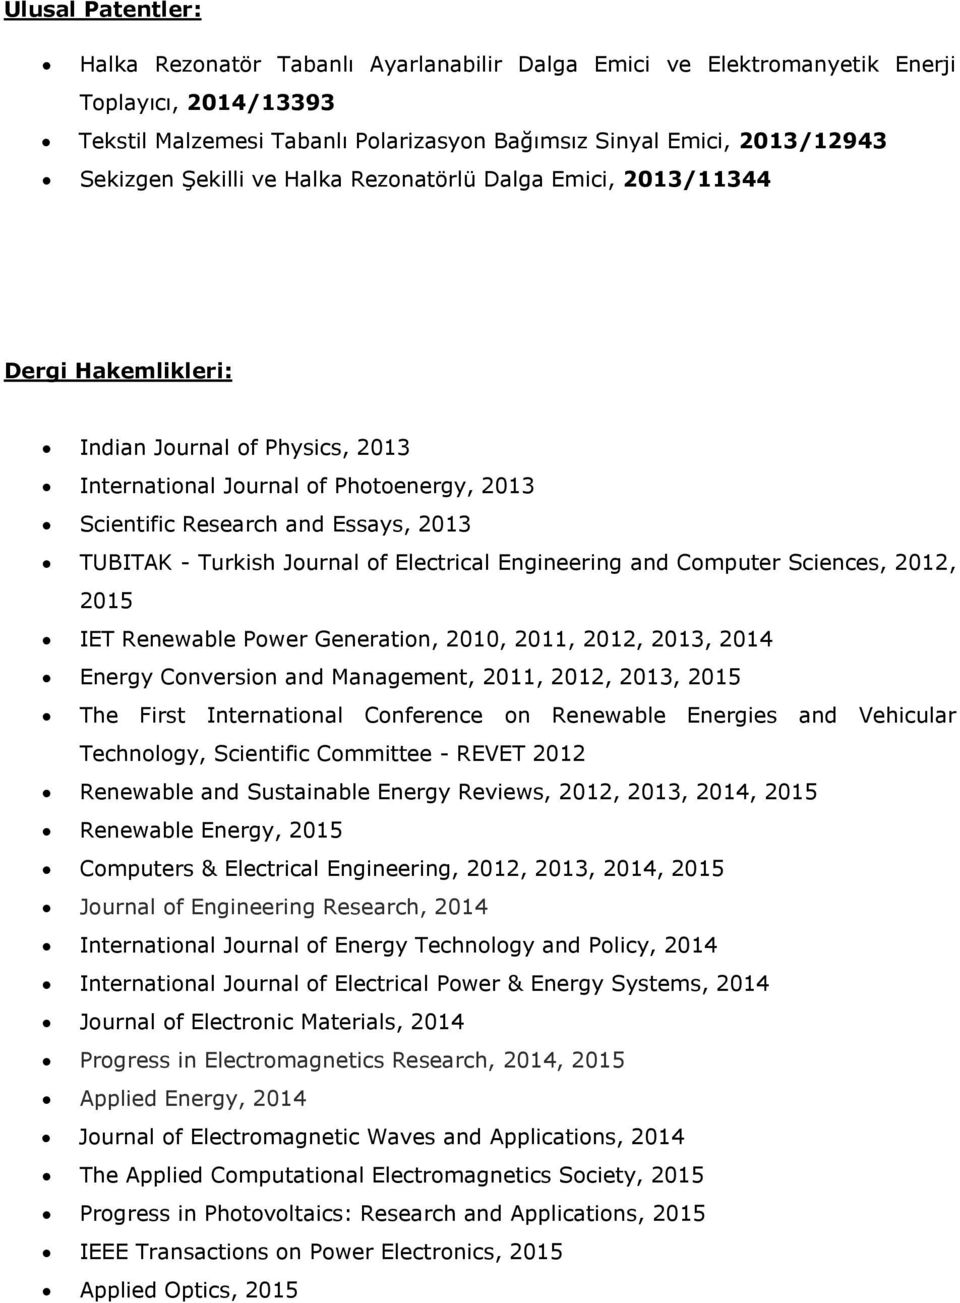 Turkish Journal of Electrical Engineering and Computer Sciences, 2012, 2015 IET Renewable Power Generation, 2010, 2011, 2012, 2013, 2014 Energy Conversion and Management, 2011, 2012, 2013, 2015 The